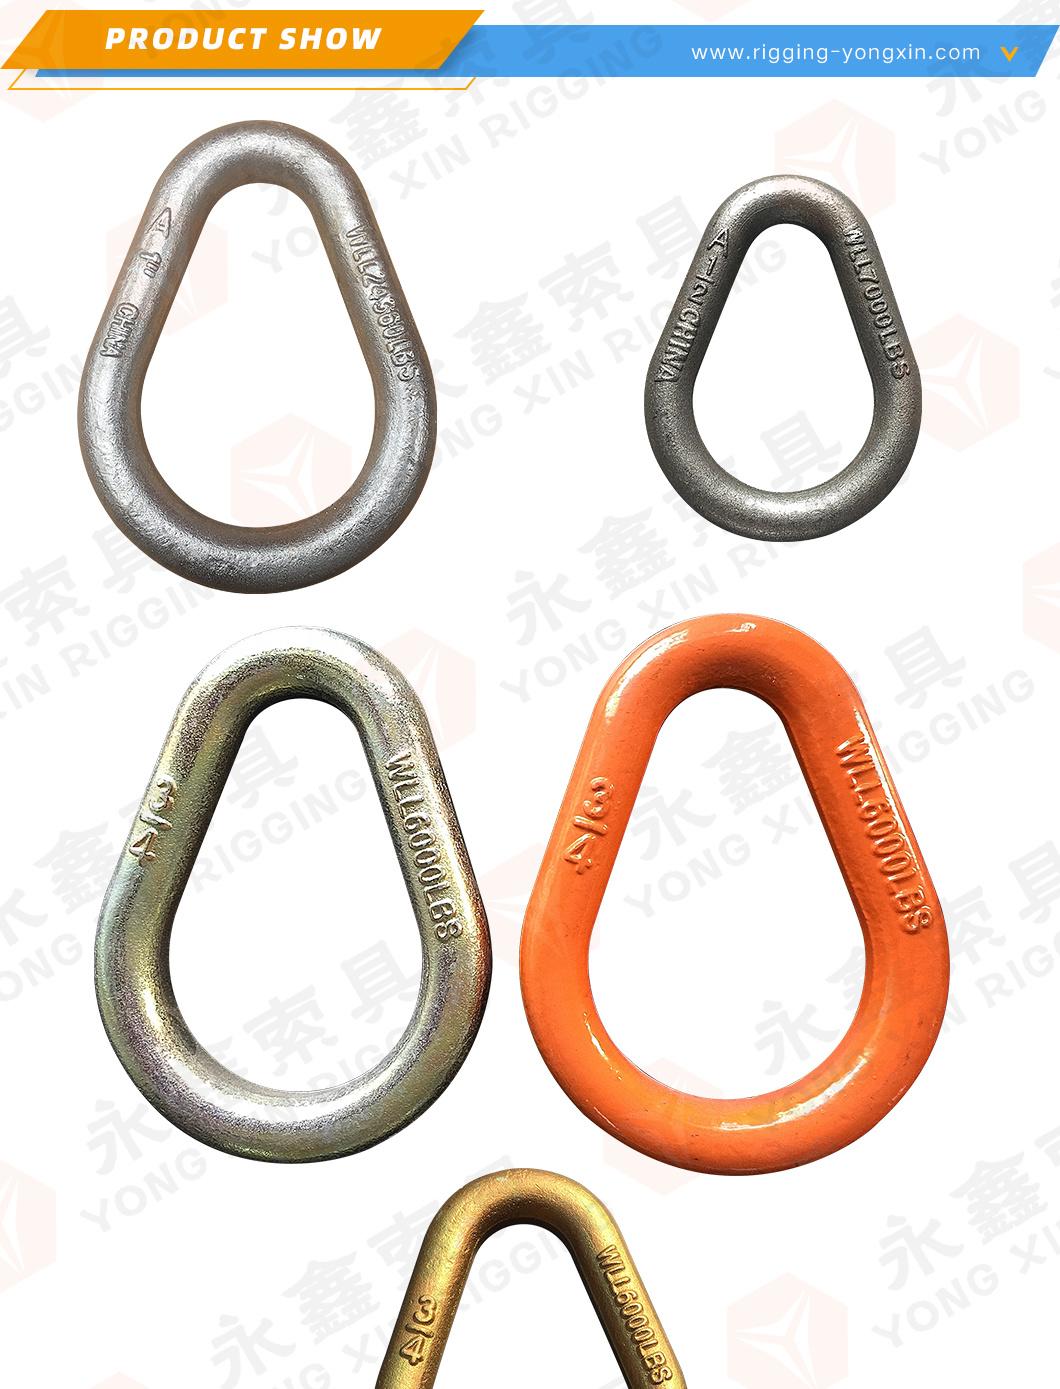 Factory Price Alloy Steel Forged Pear Shape Master Lifting Link for Chain Lifting|Forged Pear Shape Link Ring